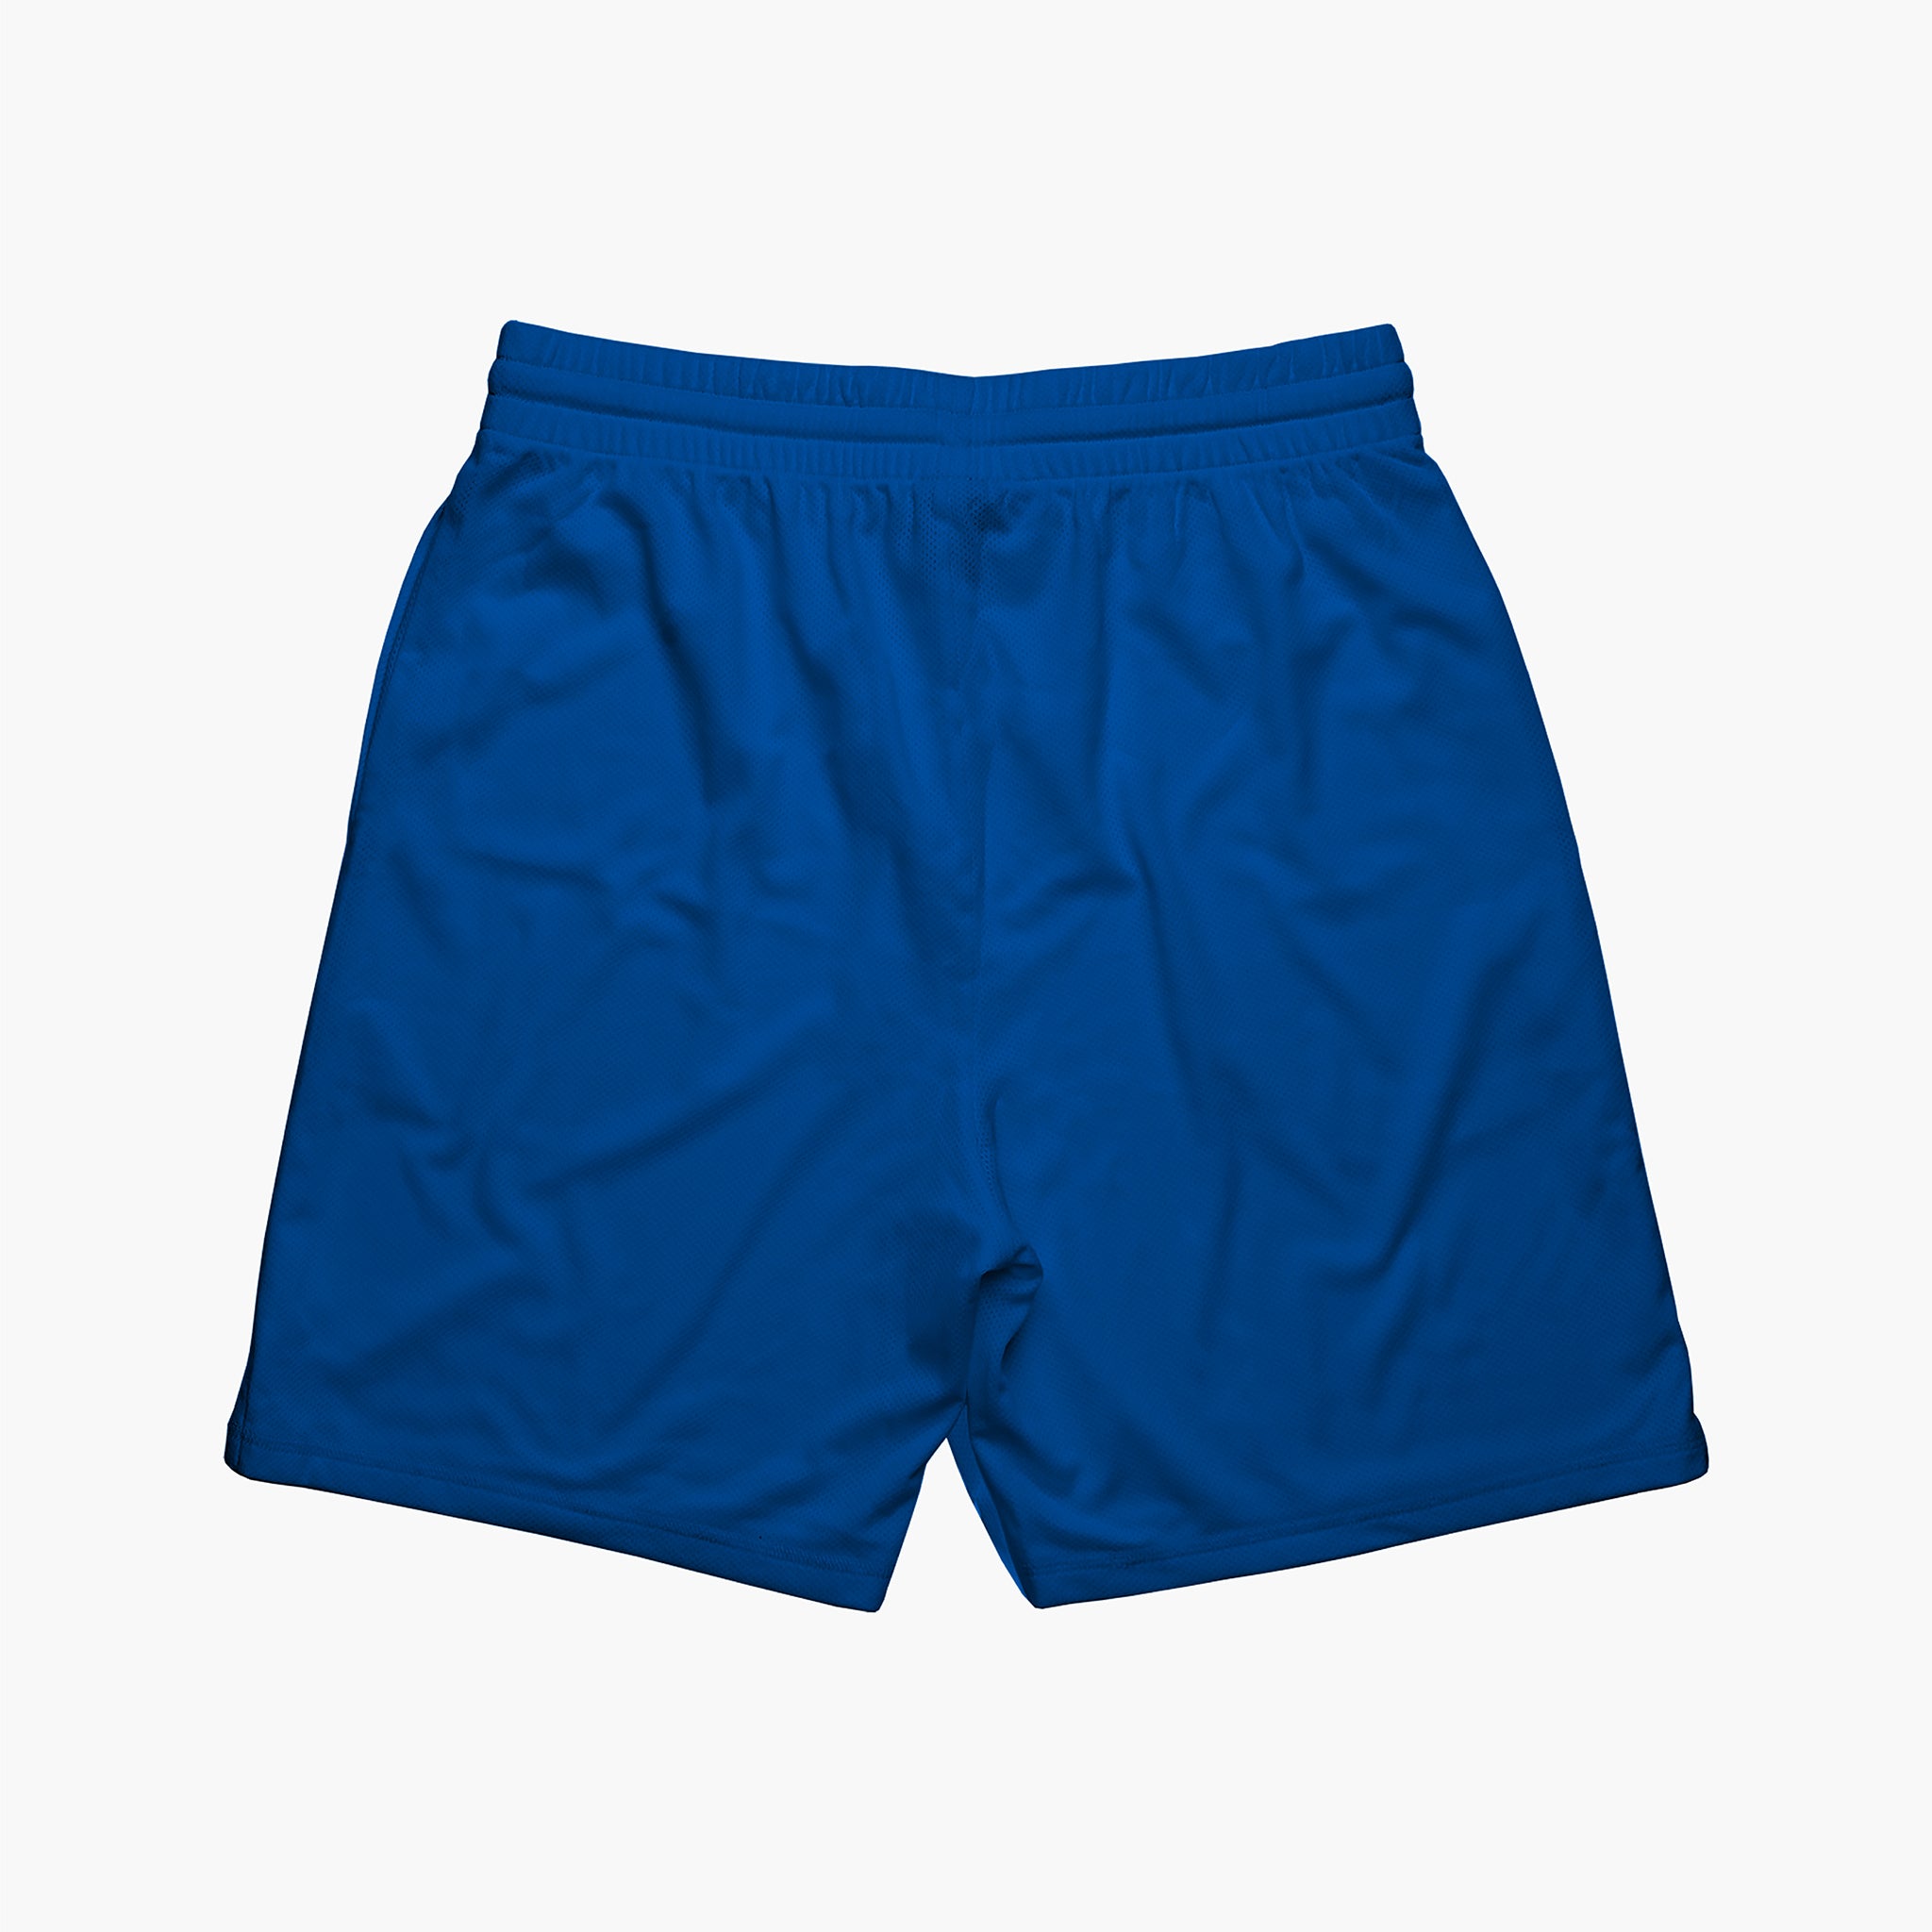 UHF Stadium Shorts - Frequently Asked Questions